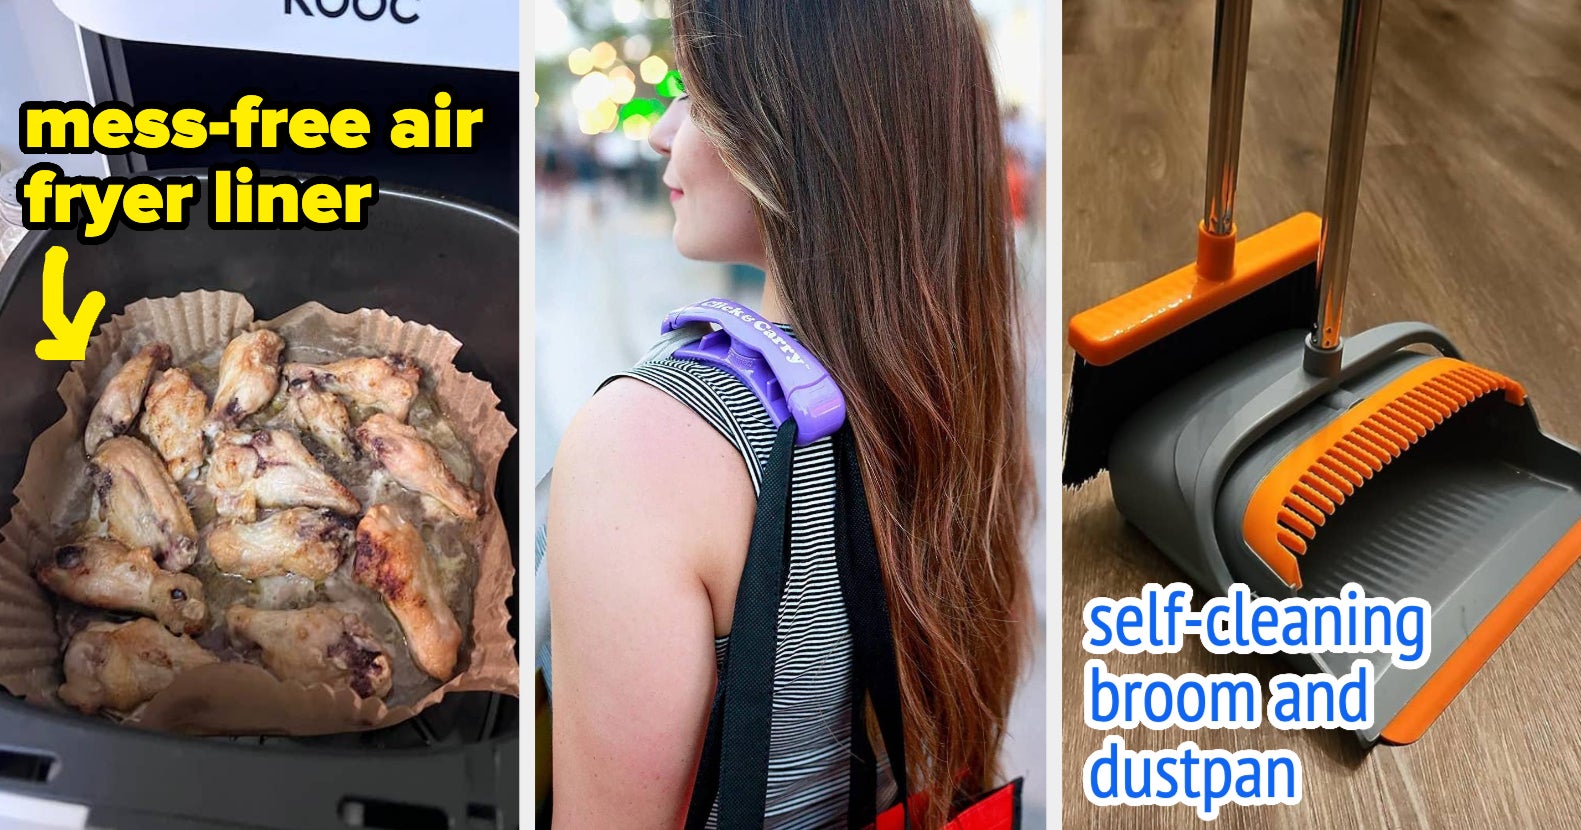 53 Products That Prove There Are *Much* Easier Ways To Do Every Day Tasks